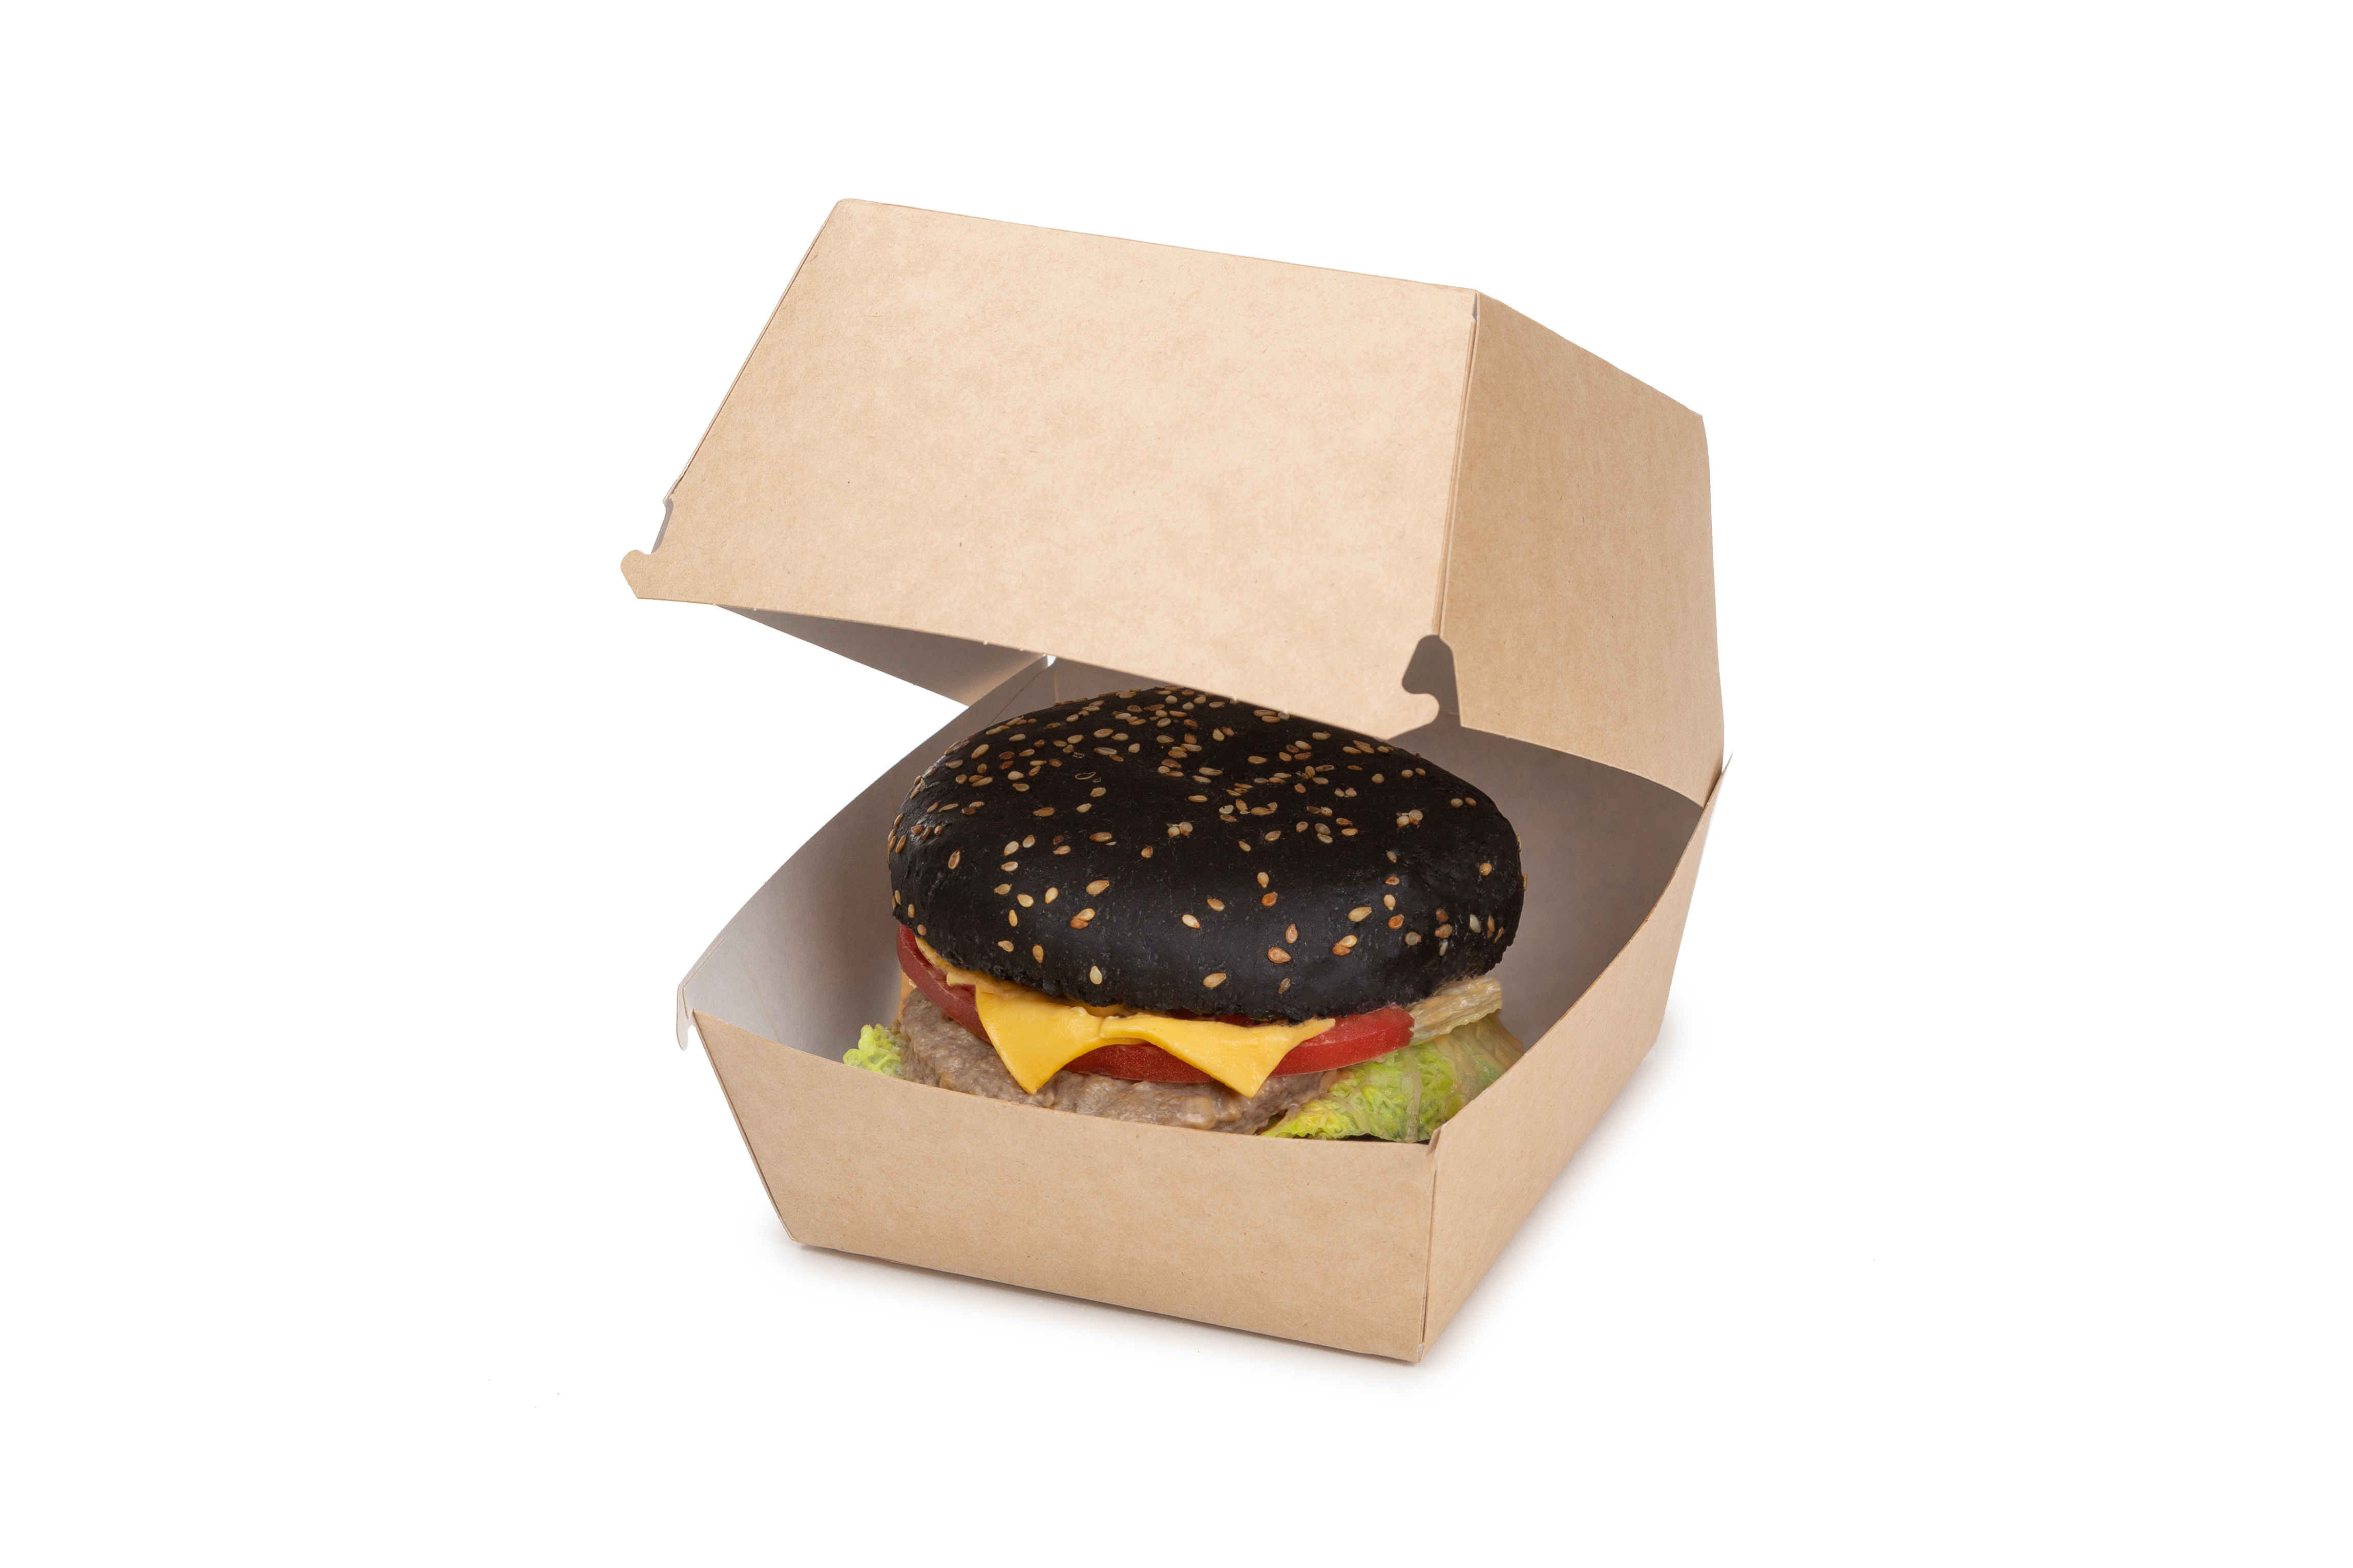 OSQ BURGER M packaging for burgers